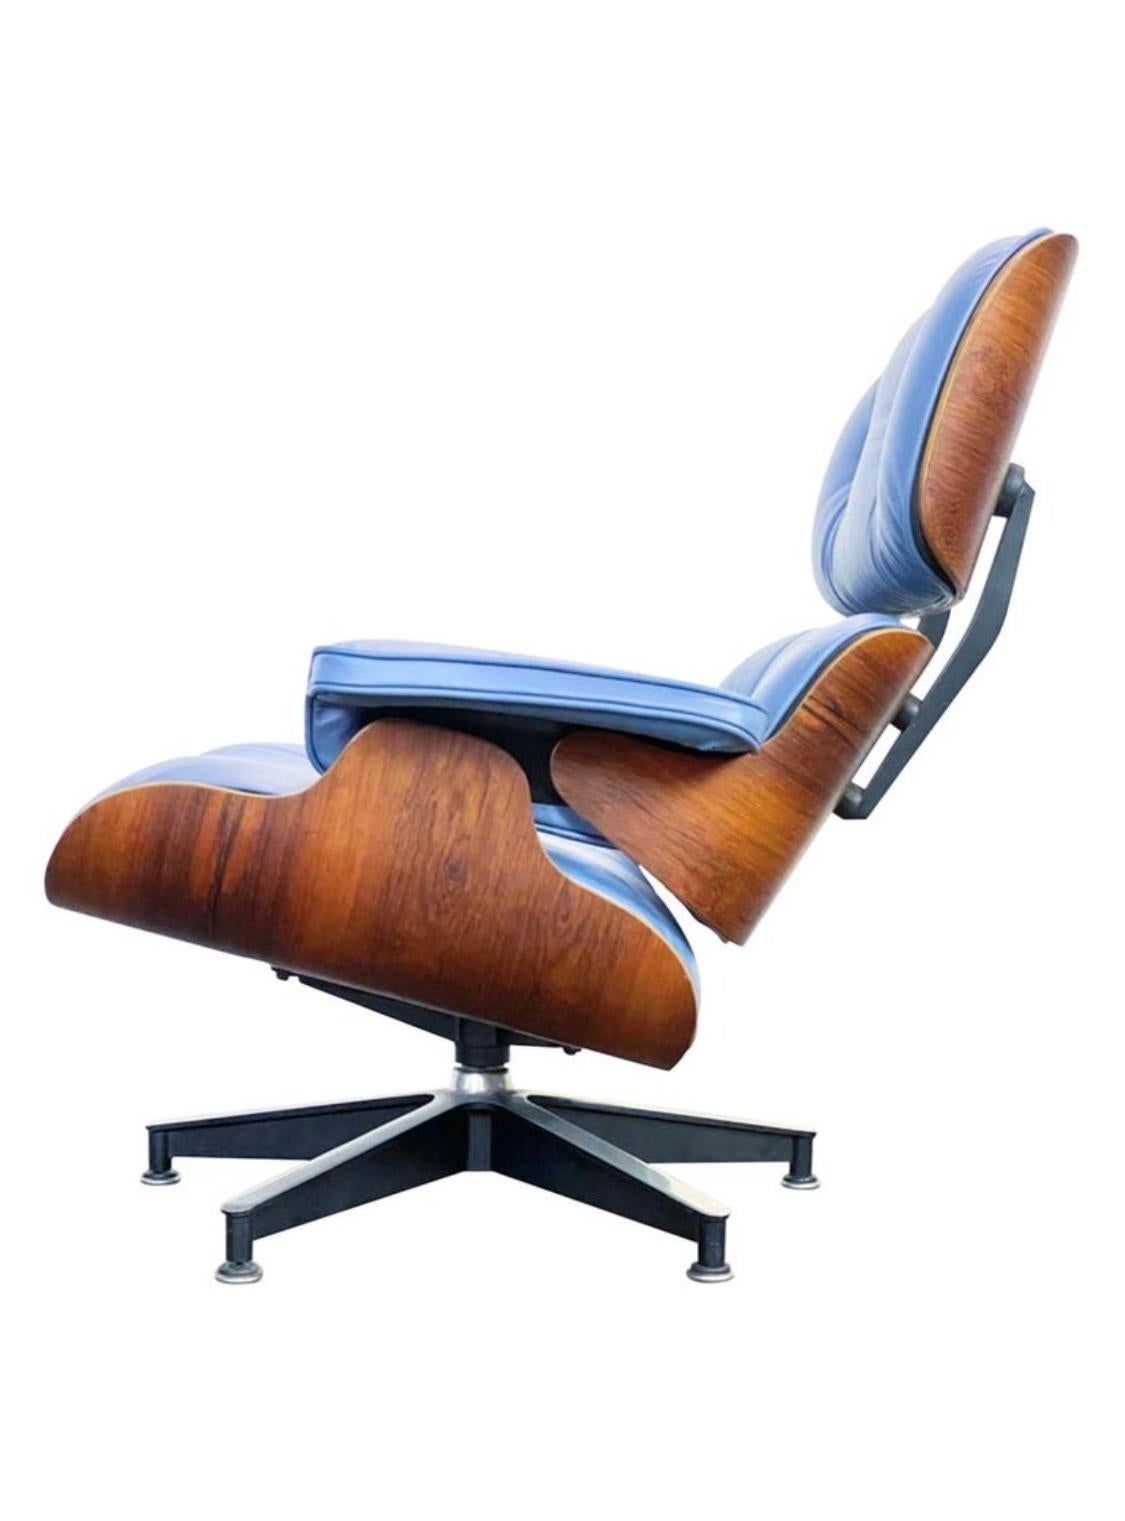 Restored Herman Miller Eames Lounge Chair with Custom Blue Leather 1